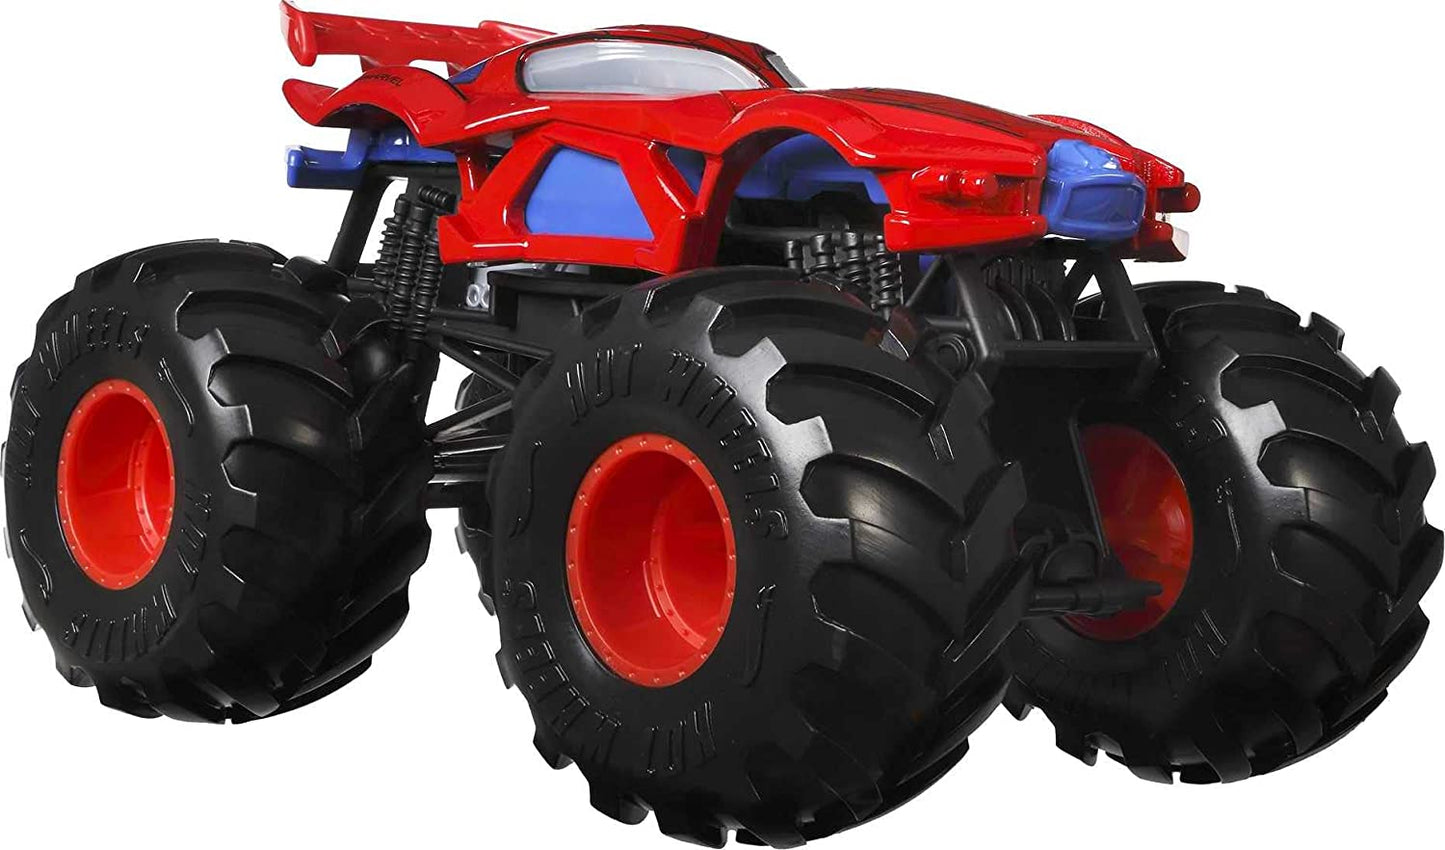 Hot Wheels Monster Trucks 1:24 Scale Marvel Spiderman Vehicle,Collectible Die-Cast Metal Toy Truck with Giant Wheels & Stylized Chassis, Gift for Kids Ages 3 Years Old & Up